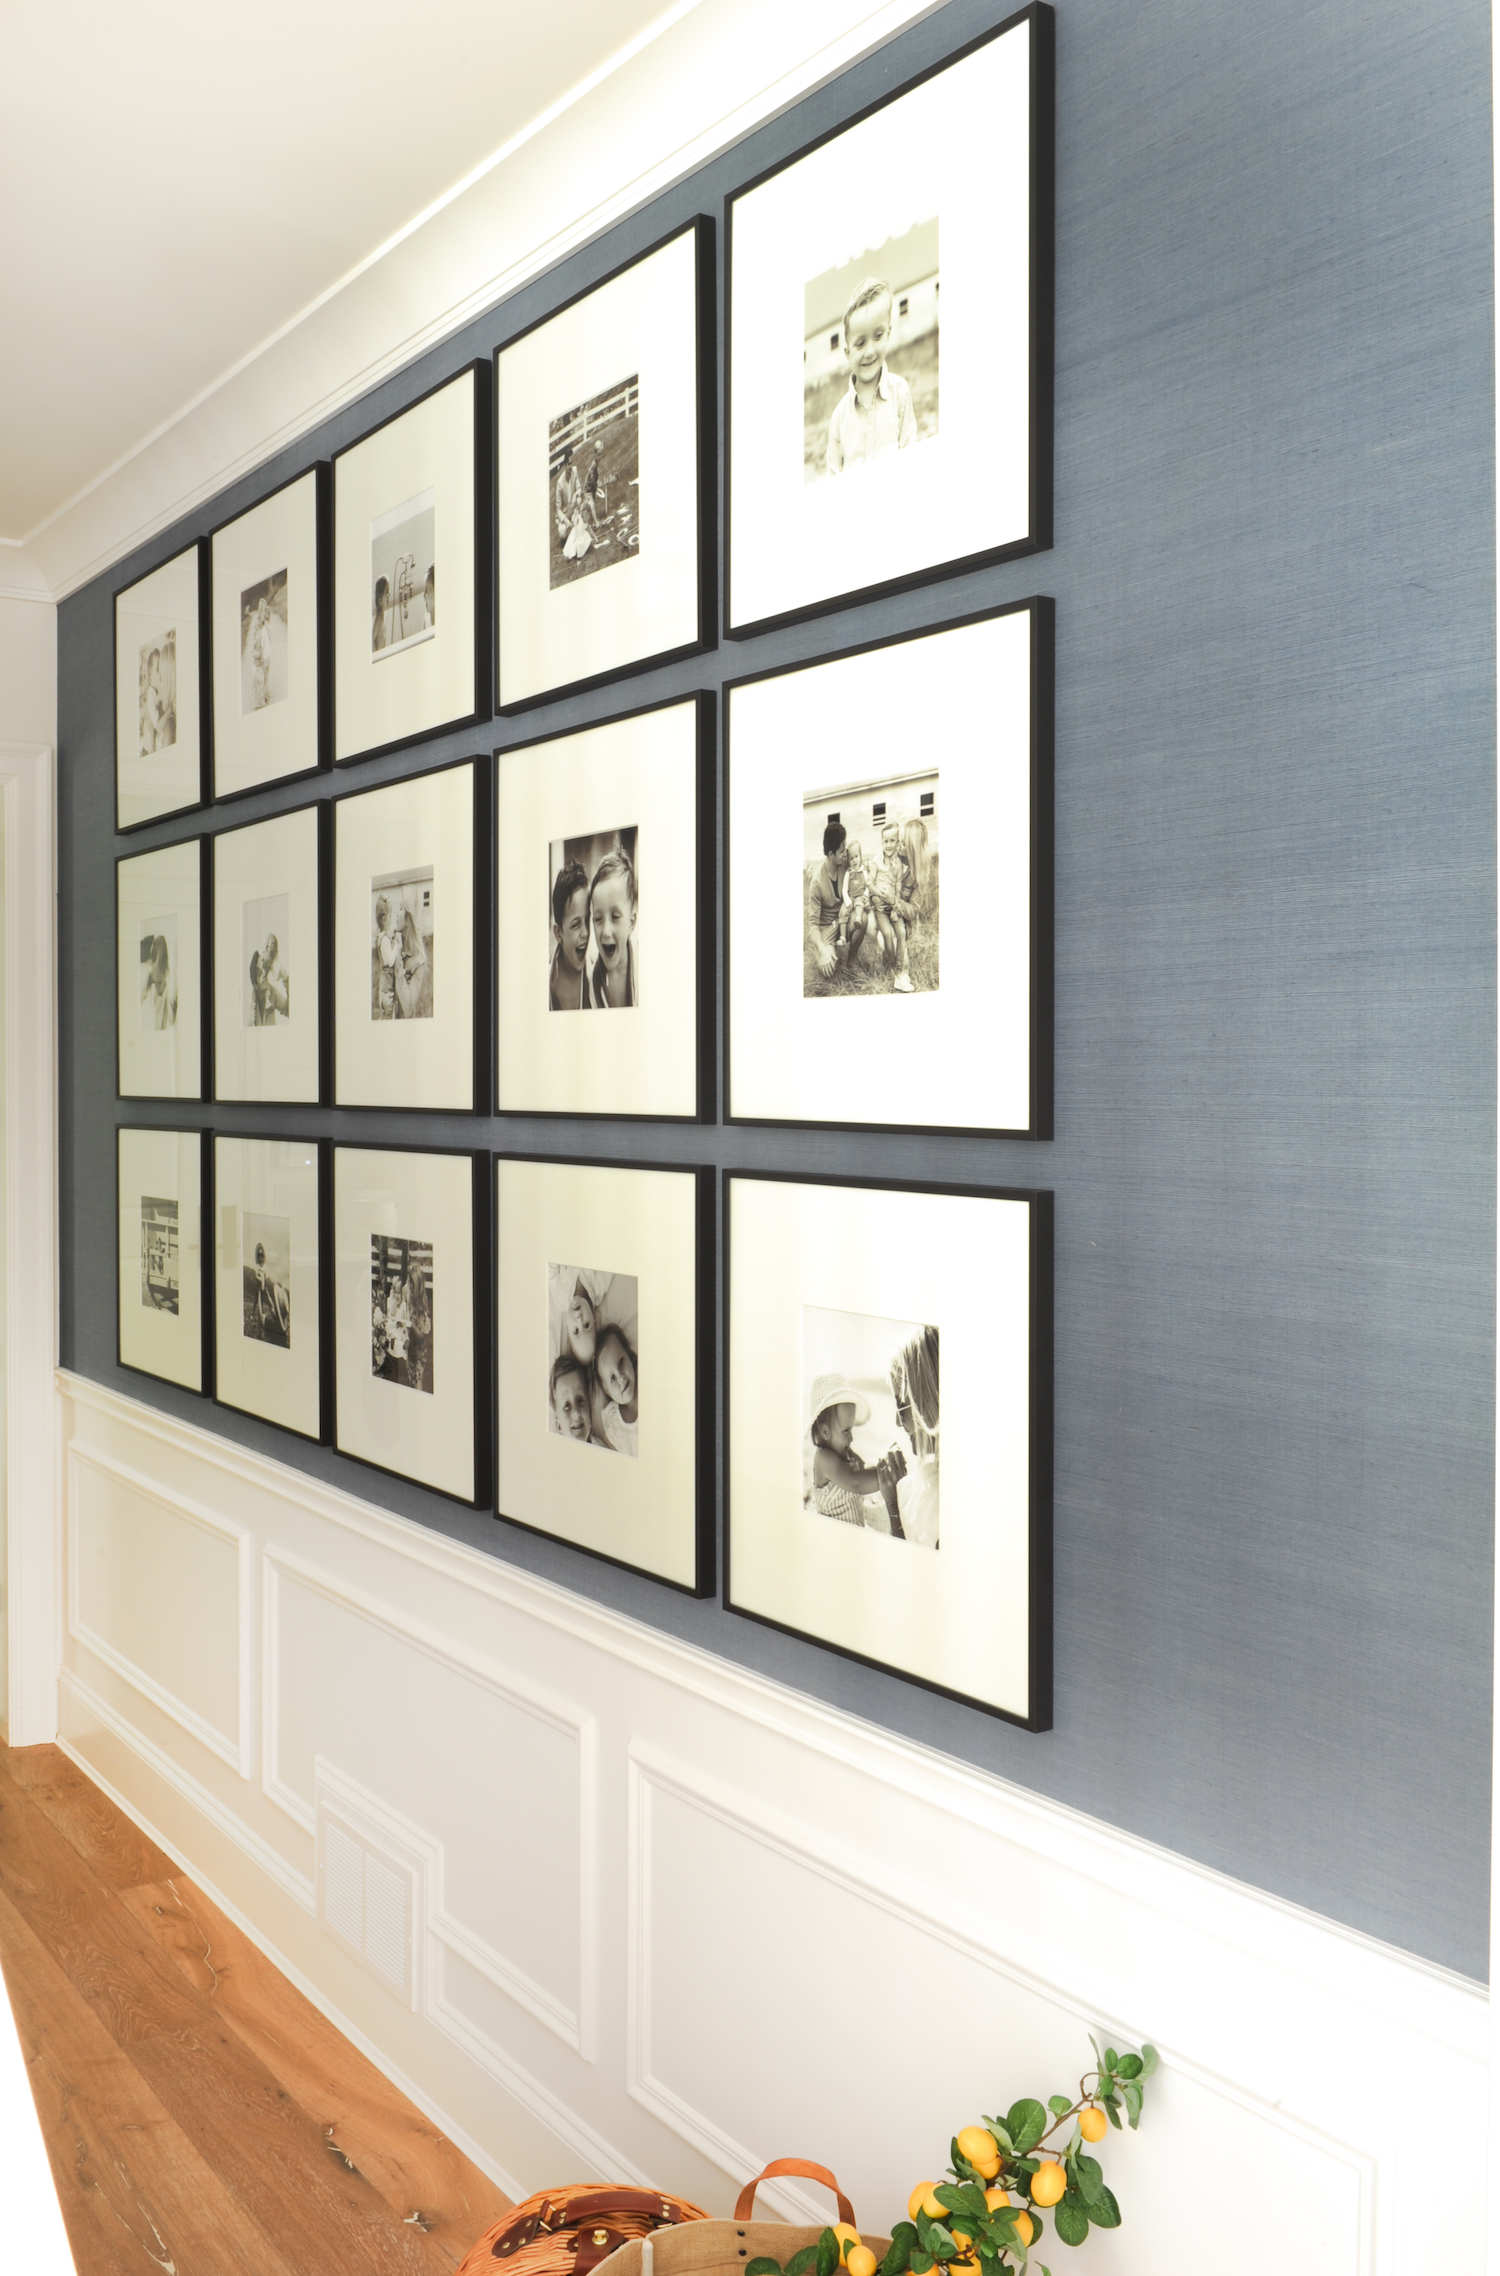 Home Gallery Wall. How to choose the perfect style of gallery wall frames